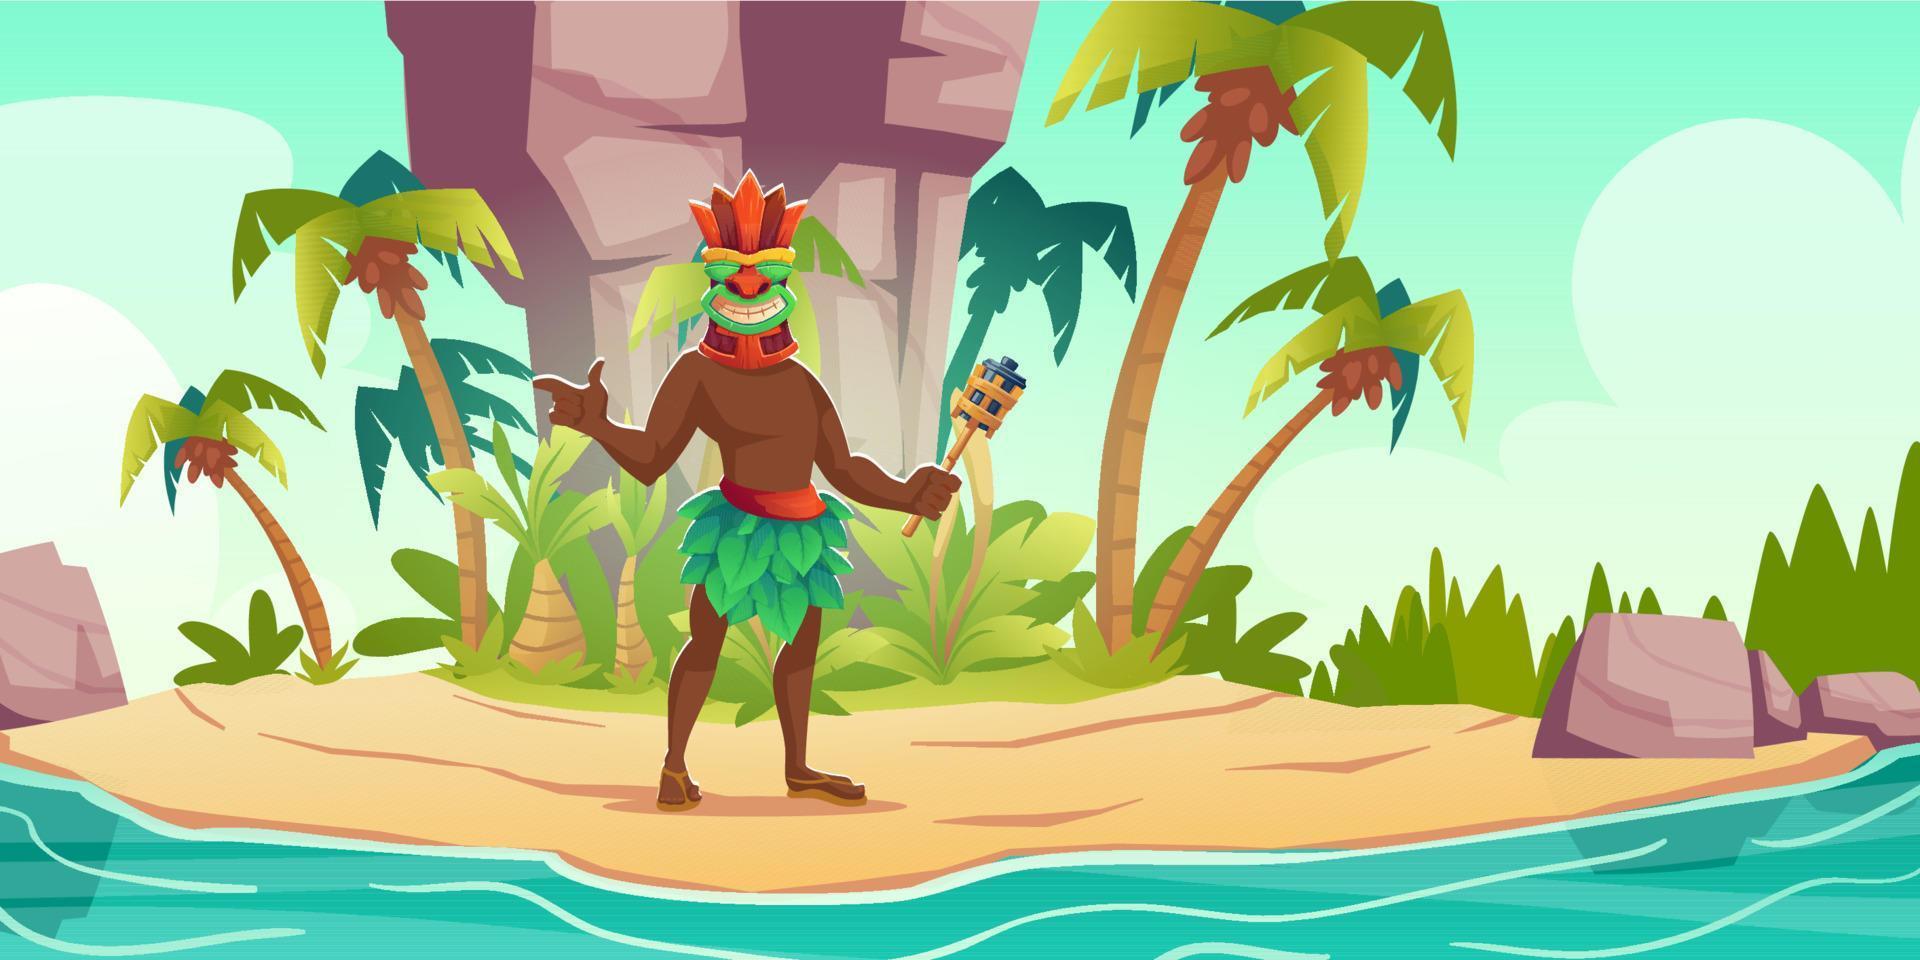 Tiki man in mask holding torch in hand on island vector